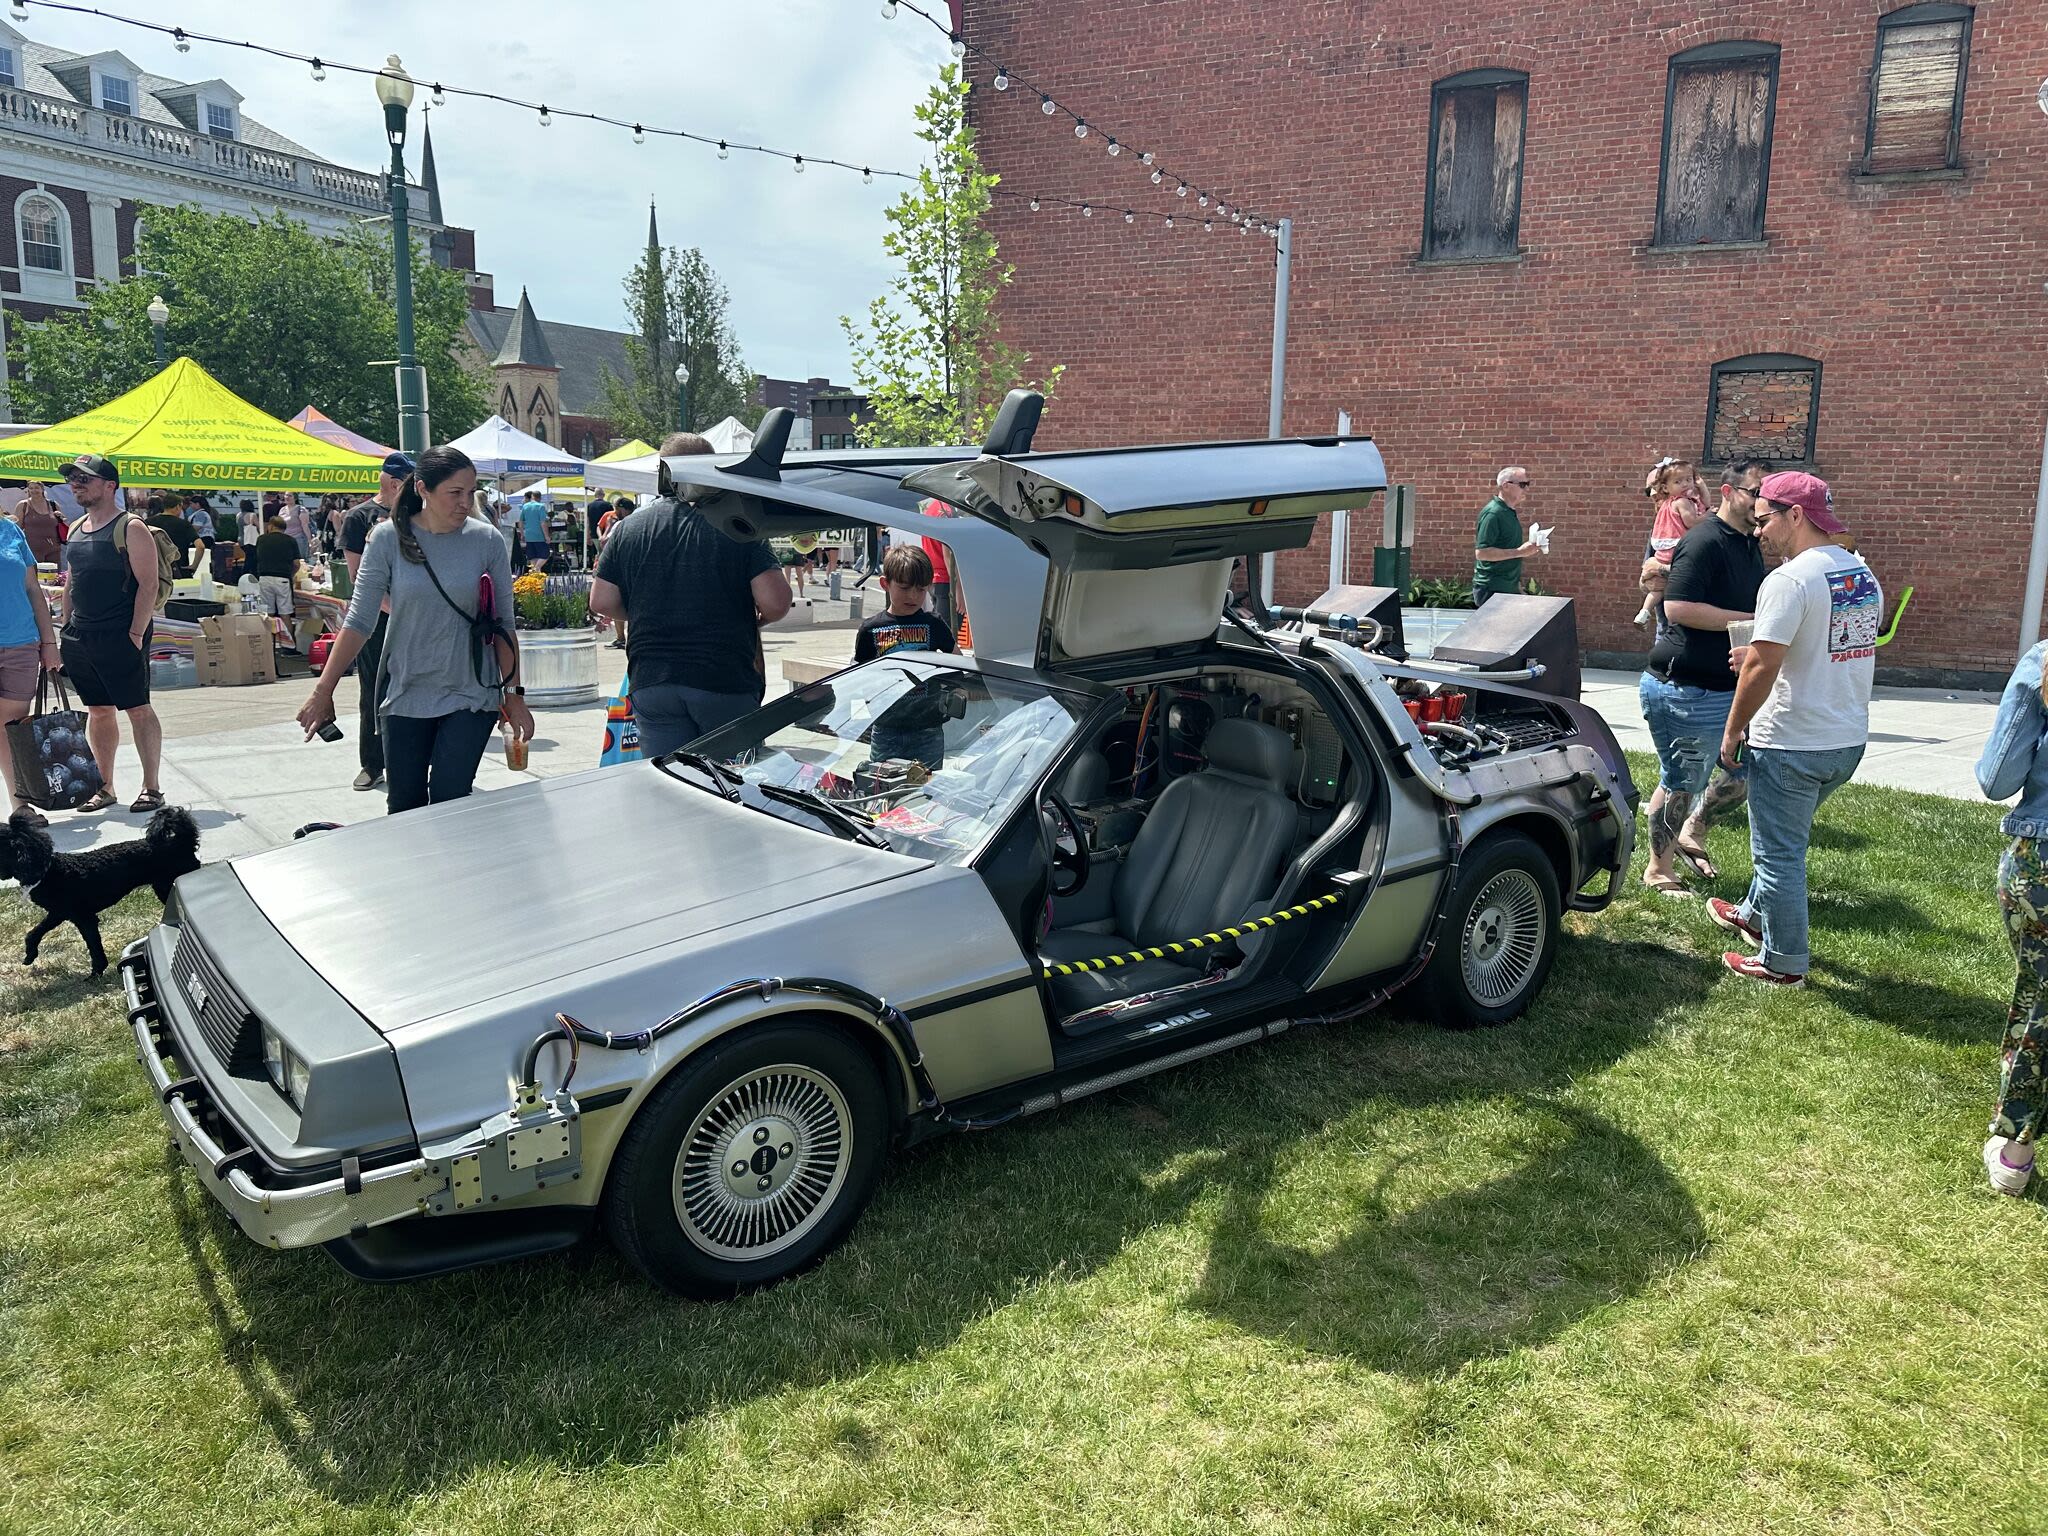 DeLorean re-creation stops by Schenectady Greenmarket ahead of "Back to the Future: The Musical"